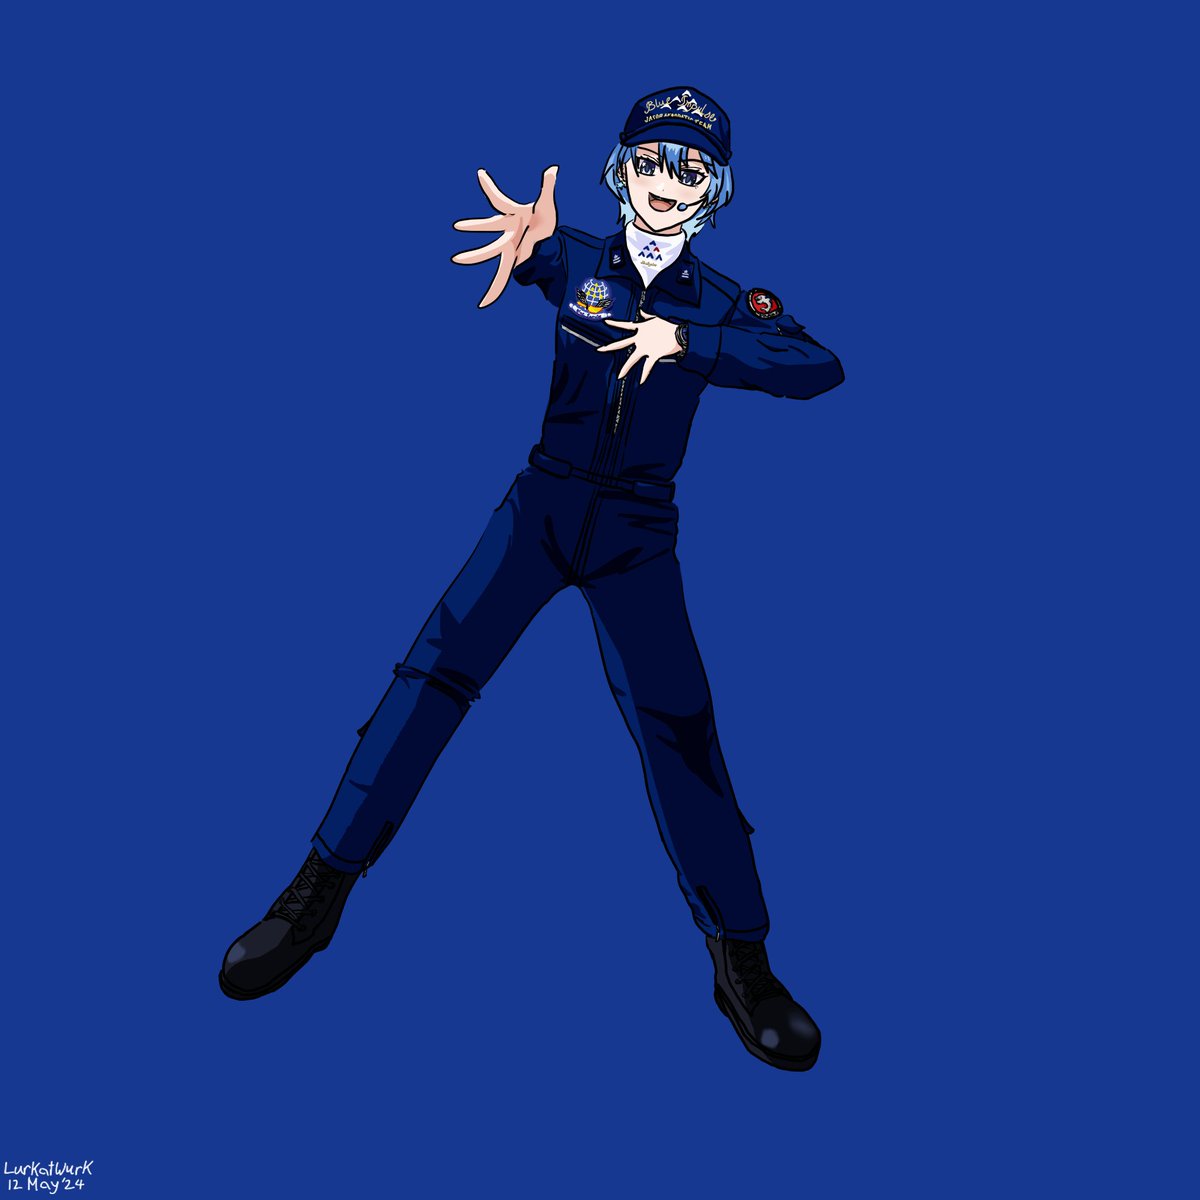 I drew Suisei performing while wearing the uniform of a Major in the Blue Impulse, the JASDF's premier aerobatic team.

You are now imagining the Blue Impulse doing a routine to the tune of 「Starry Jet」. You're welcome!

#ほしまちぎゃらりー
#ブルーインパルス